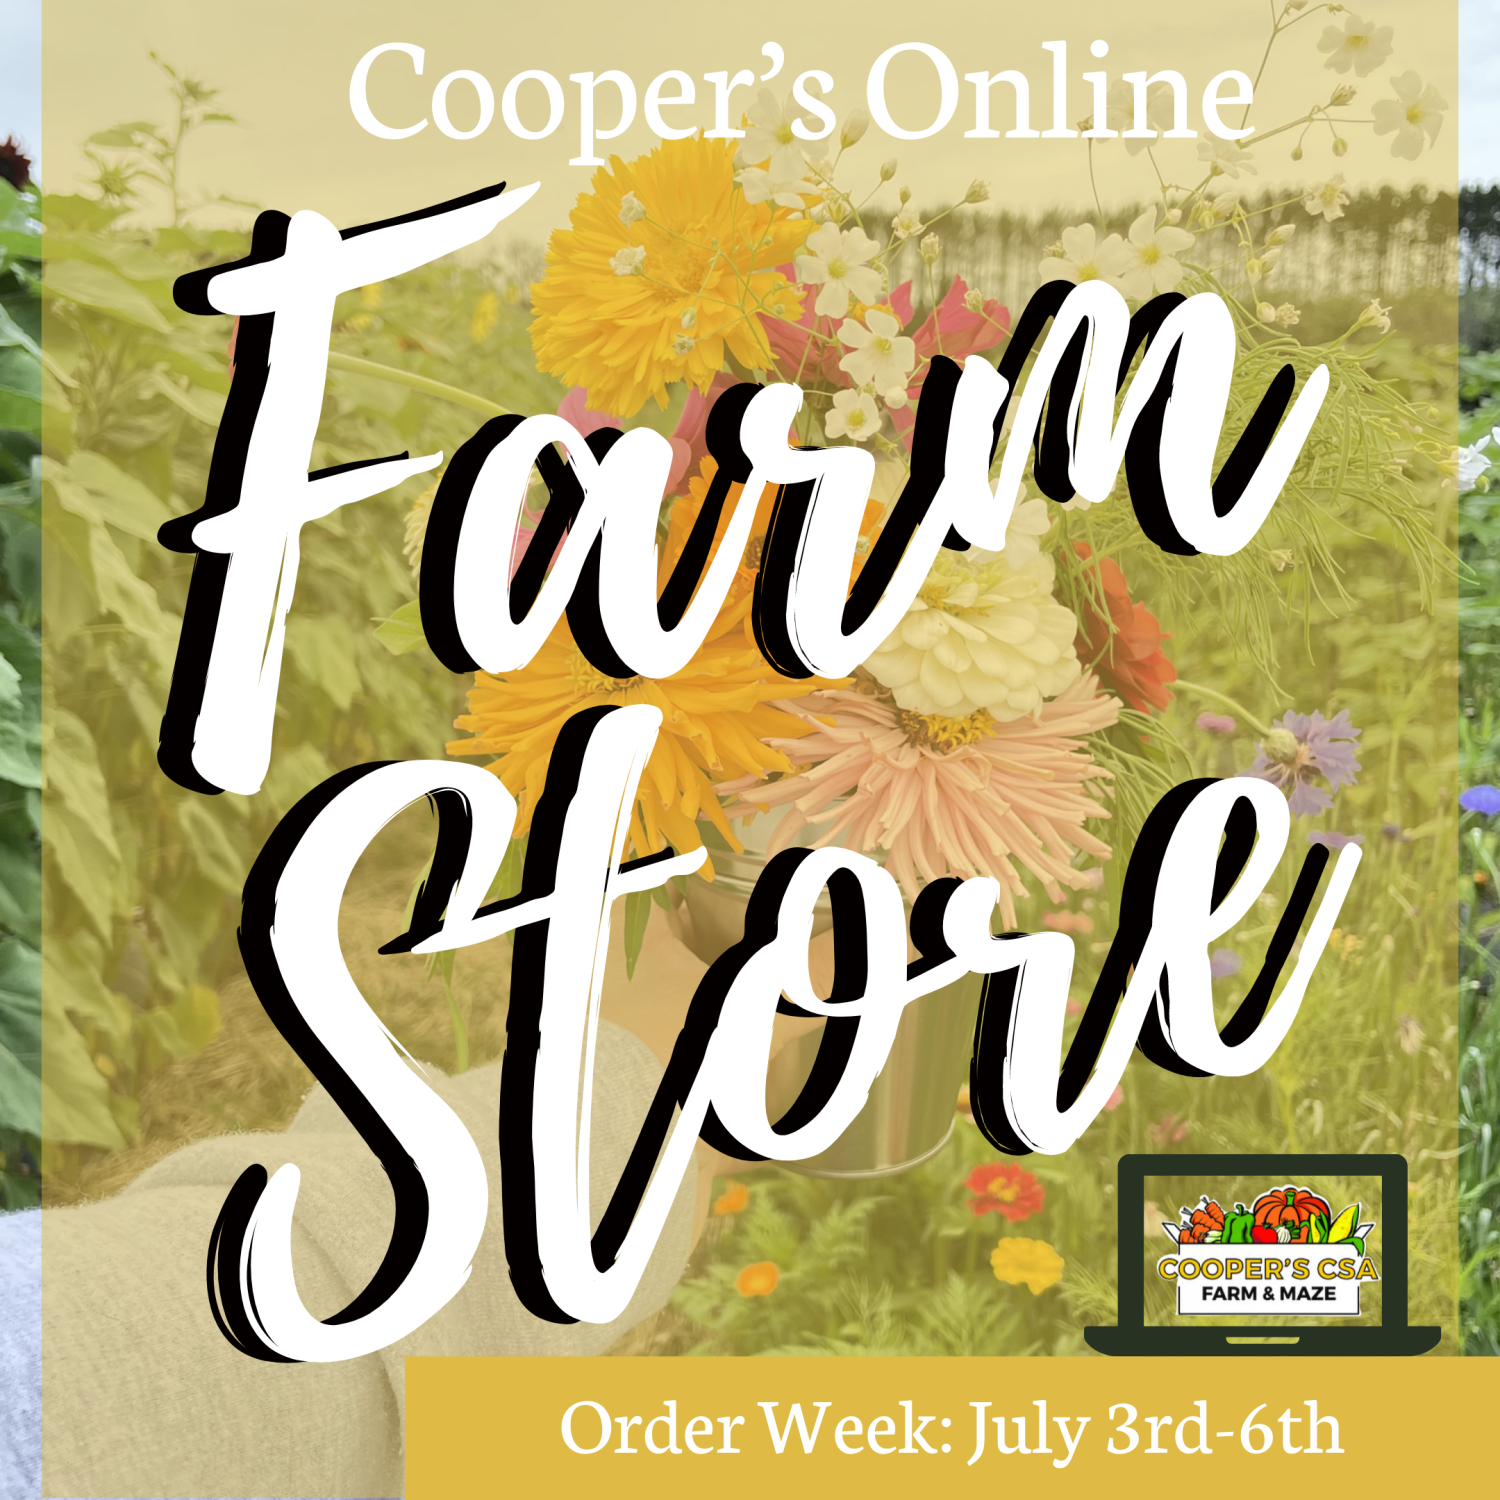 Previous Happening: Coopers CSA Online FarmStore- Order week July 3rd-6th